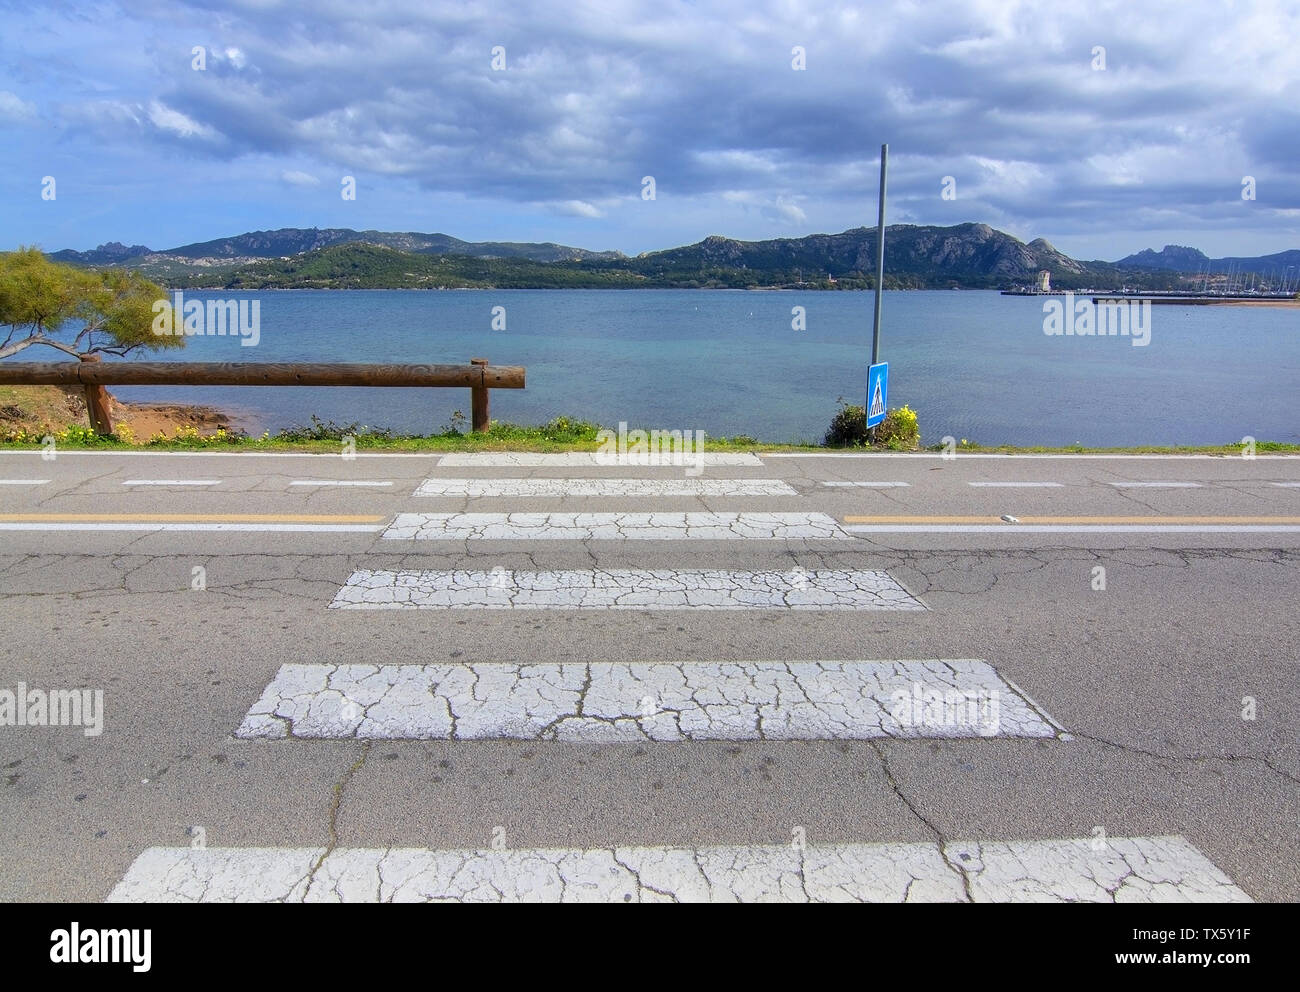 Pedestrian crossing zebra walk leading into water abstract image in Sardinia, Italy Stock Photo